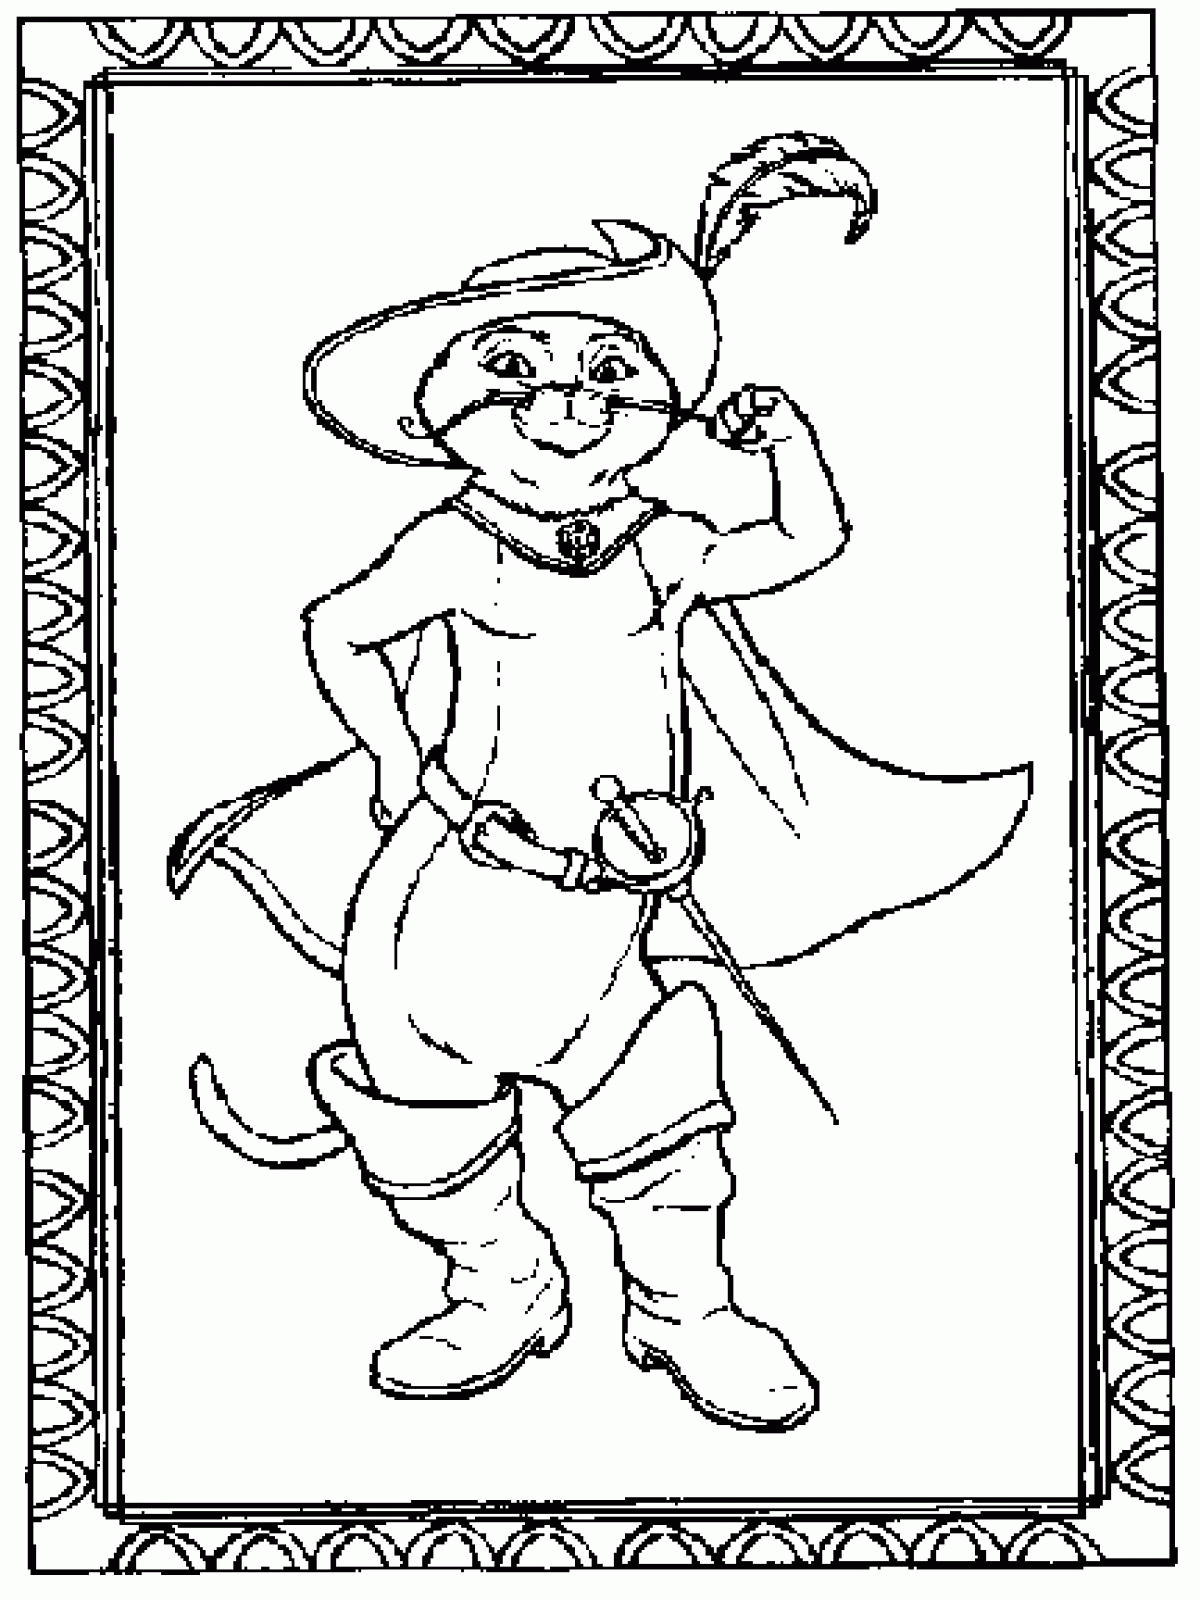 Puss In Boots Coloring Page Coloring Home